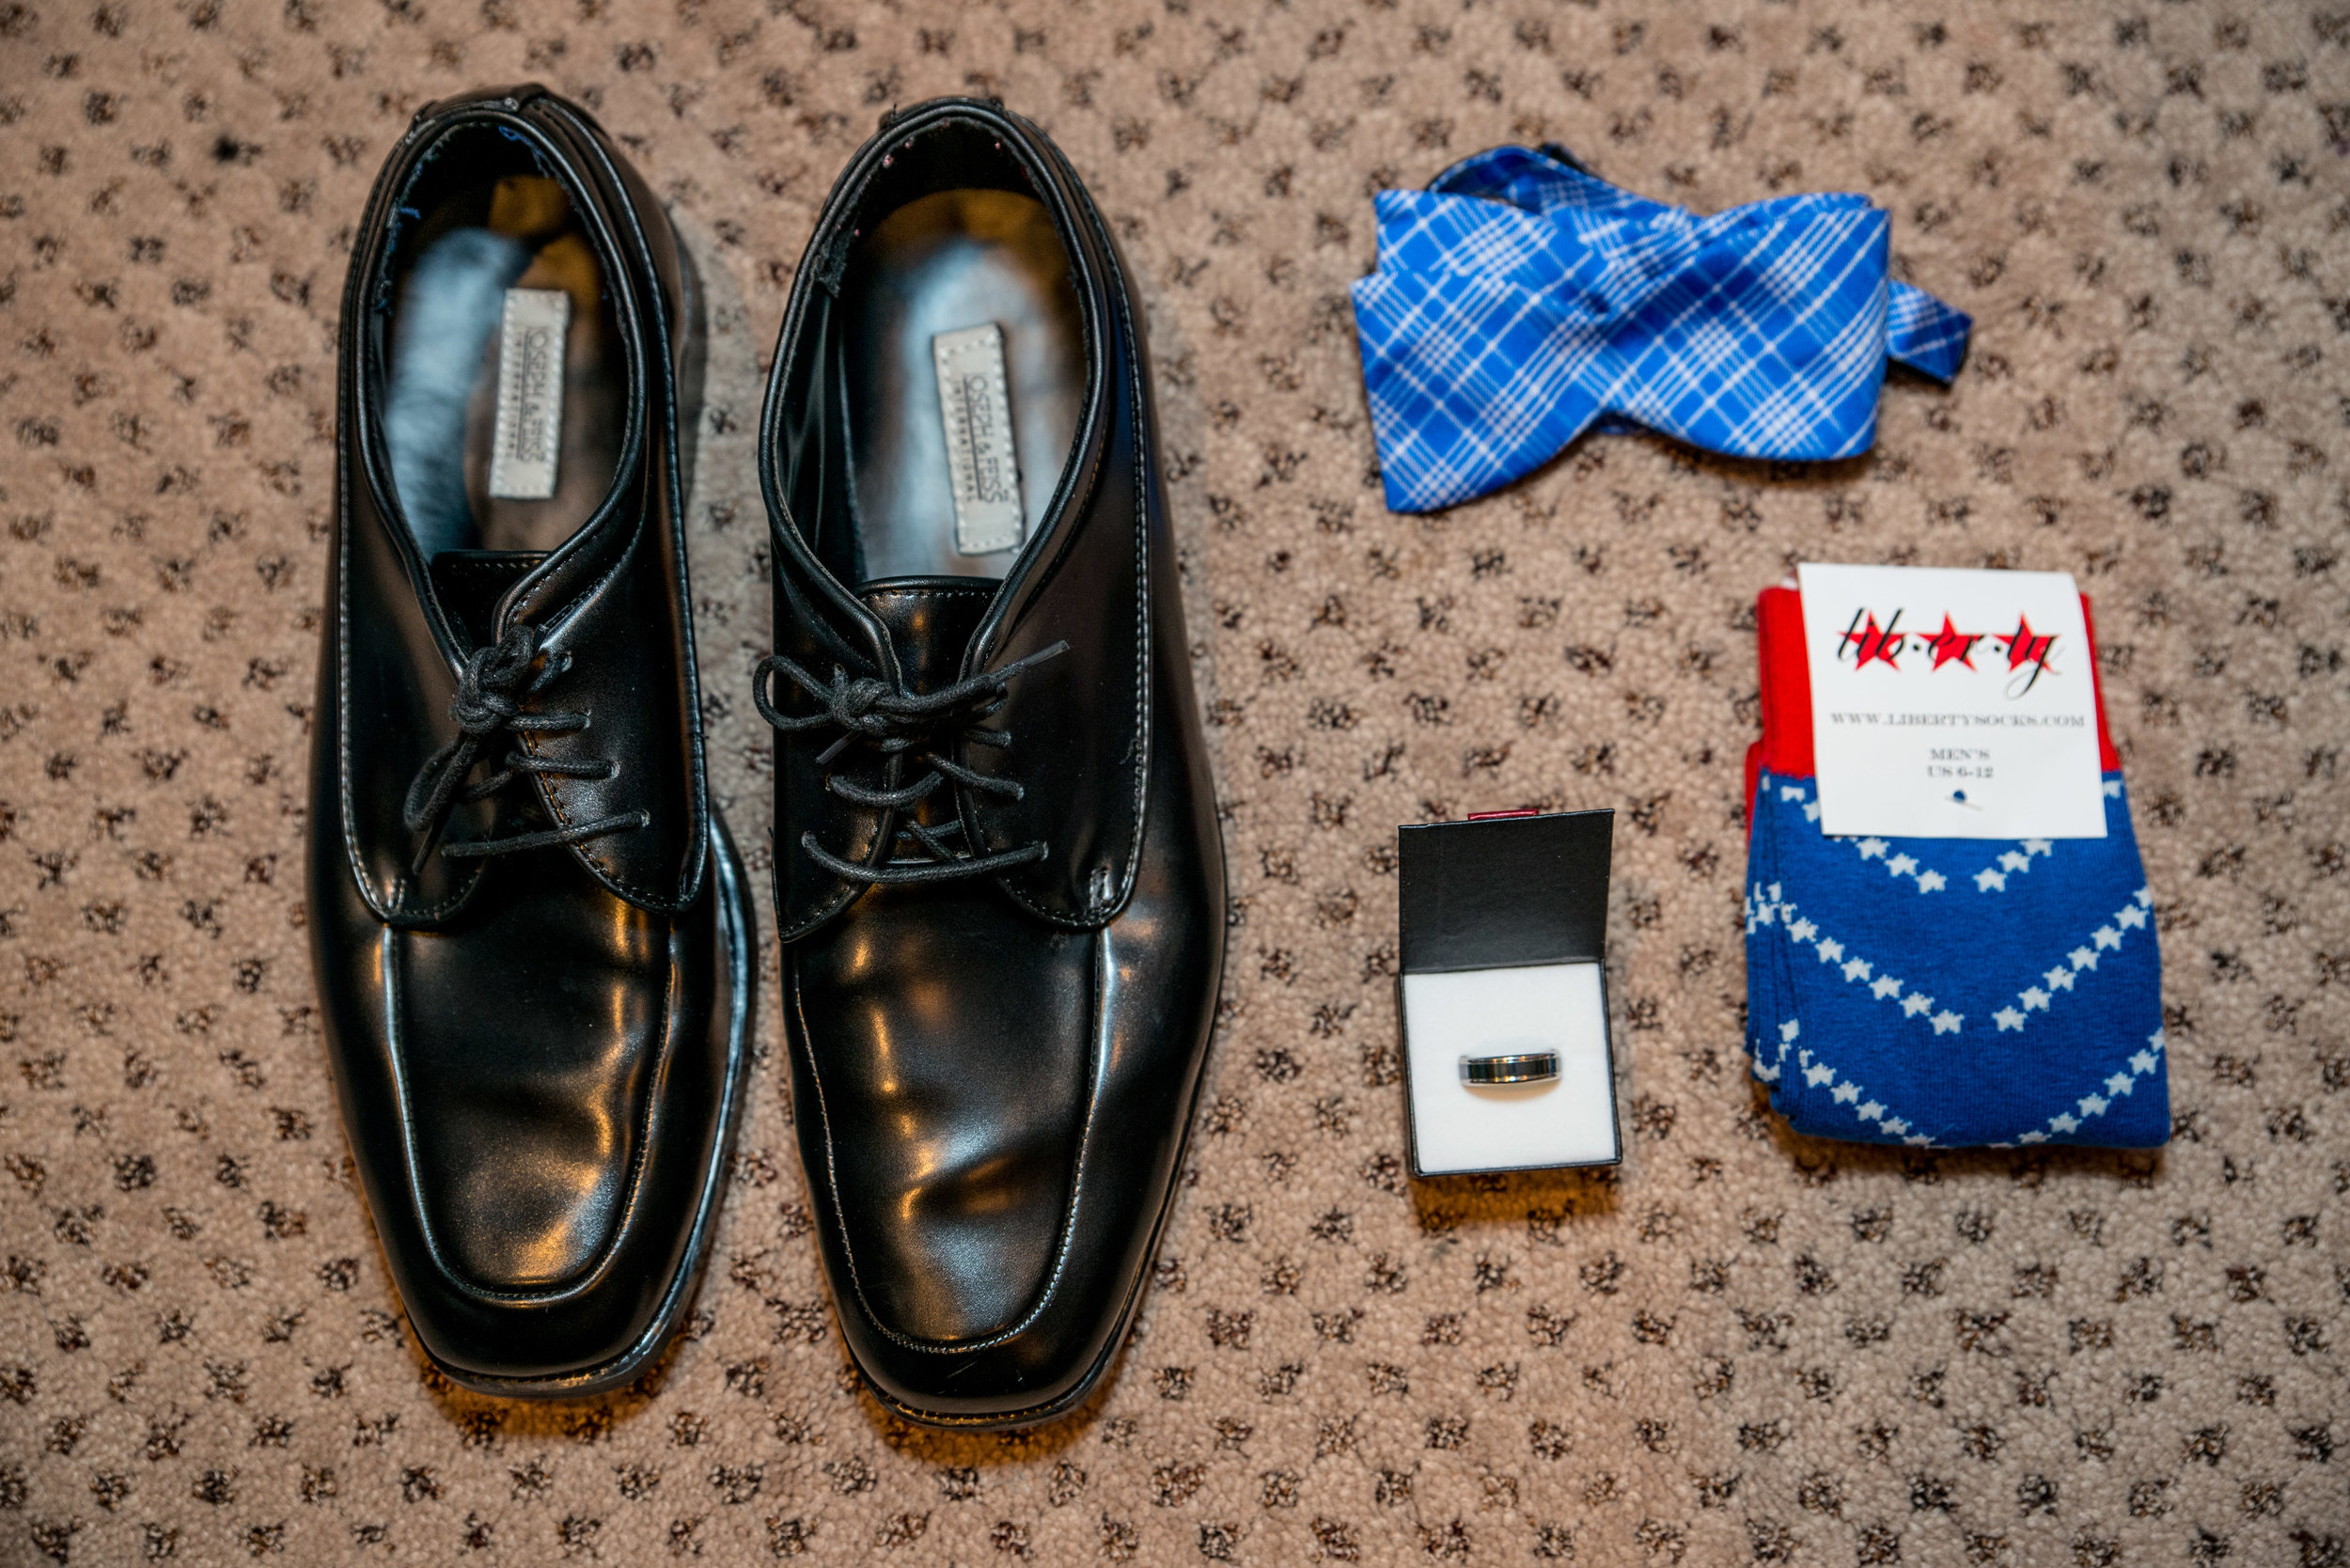  Groom's Shoes, tie, socks and watch at a Virginia Wedding 